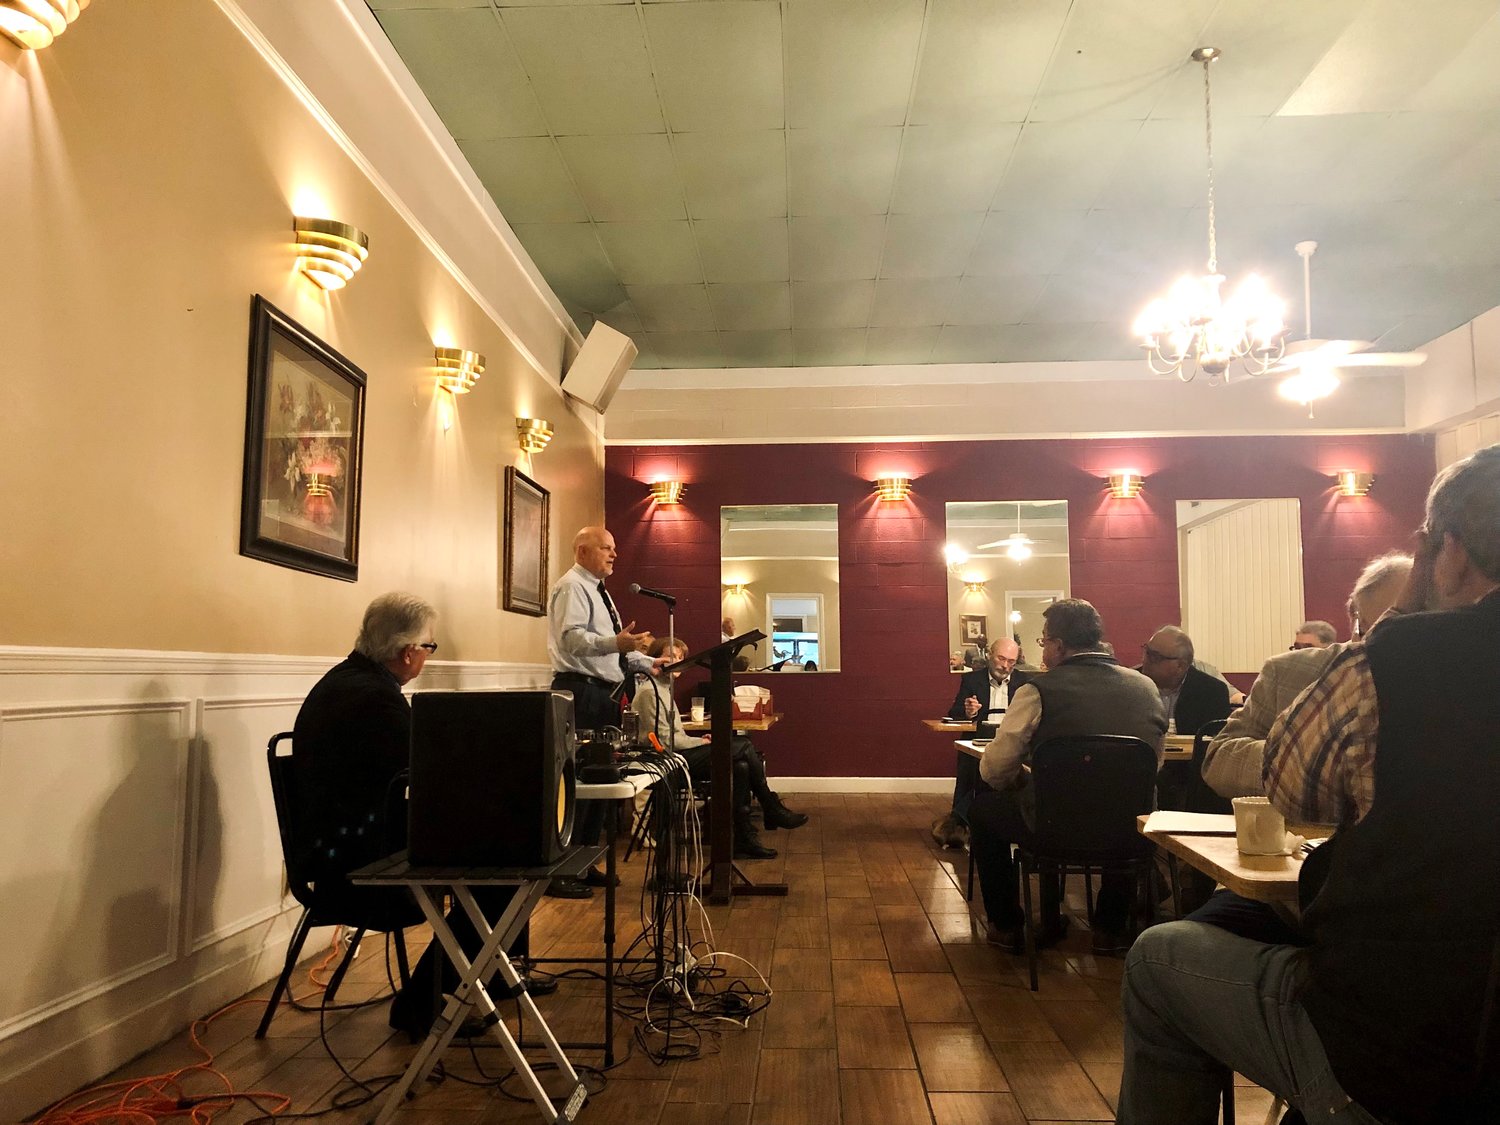 About 30 people attended a pastors conference sponsored by the N.C. Faith and Freedom Coalition held in Siler City last Wednesday to focus on “threats to our religious freedom today.”